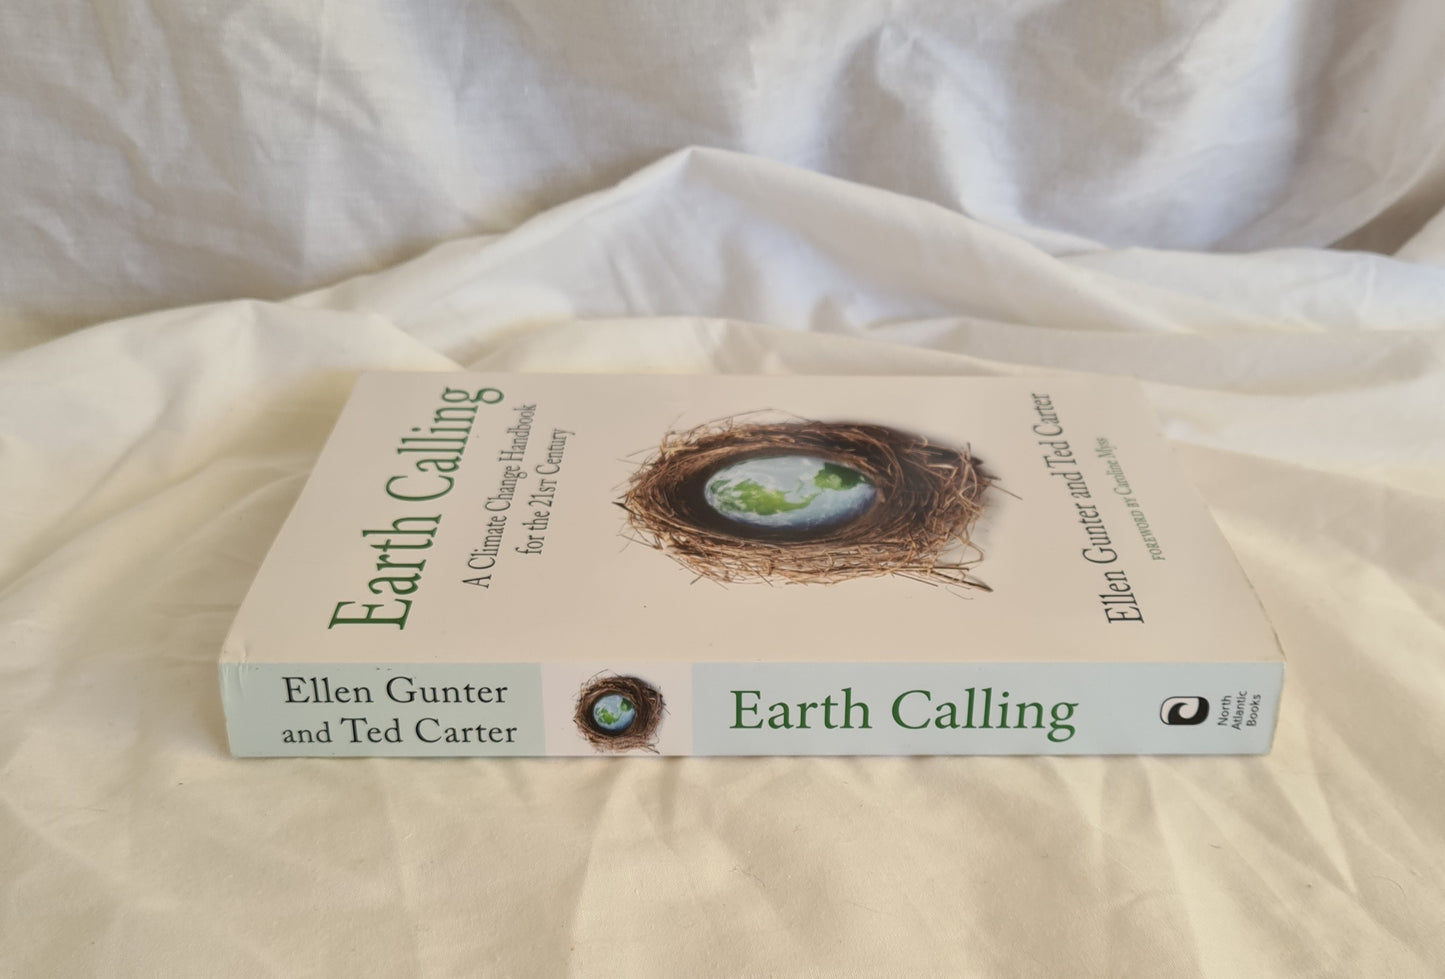 Earth Calling by Ellen Gunter and Ted Carter